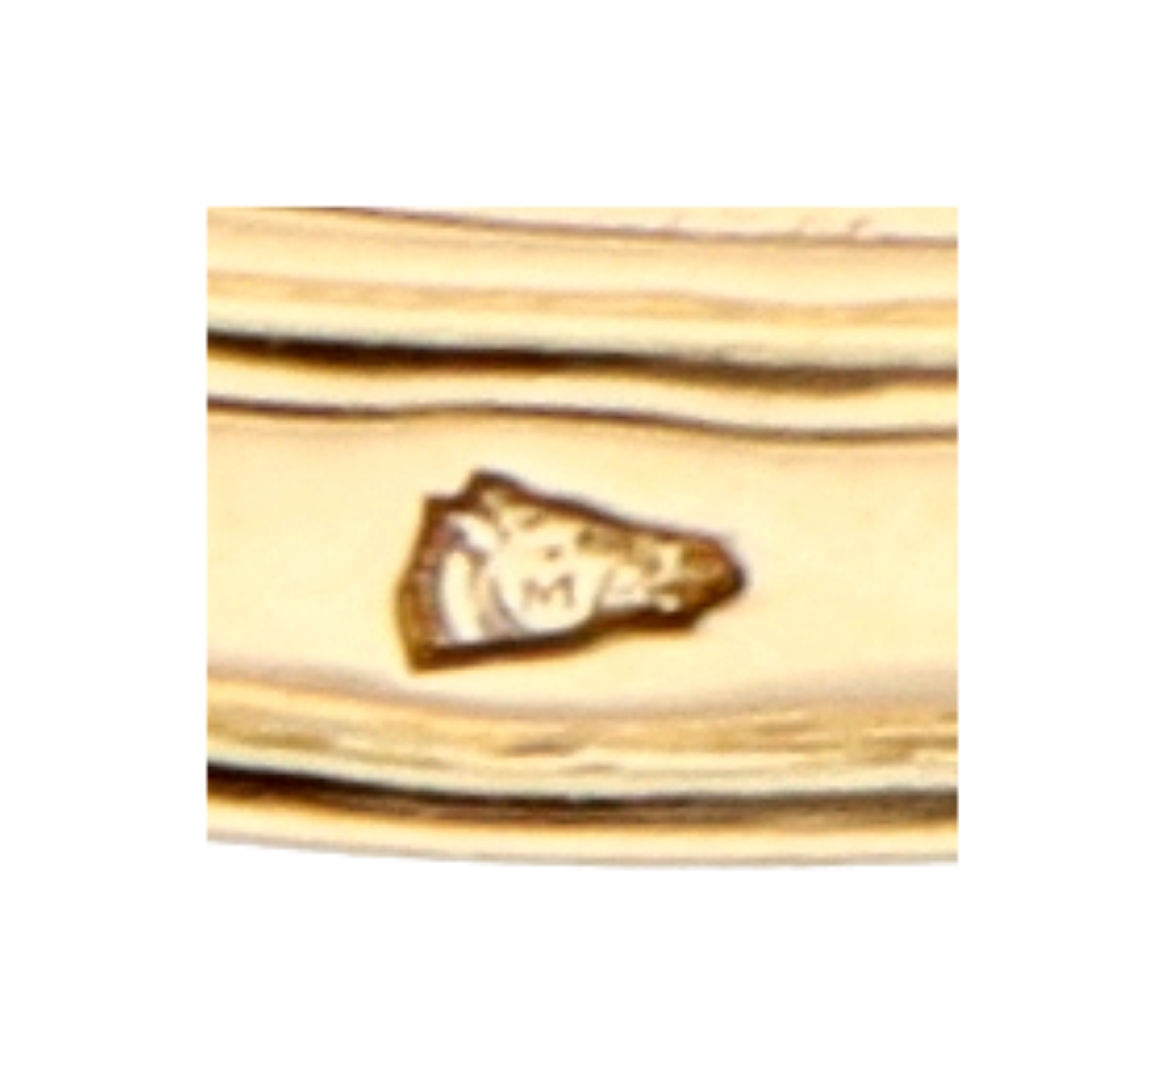 No Reserve - Franse 18K yellow gold Toi & Moi ring with approx. 0.75 ct. diamond. - Image 3 of 3